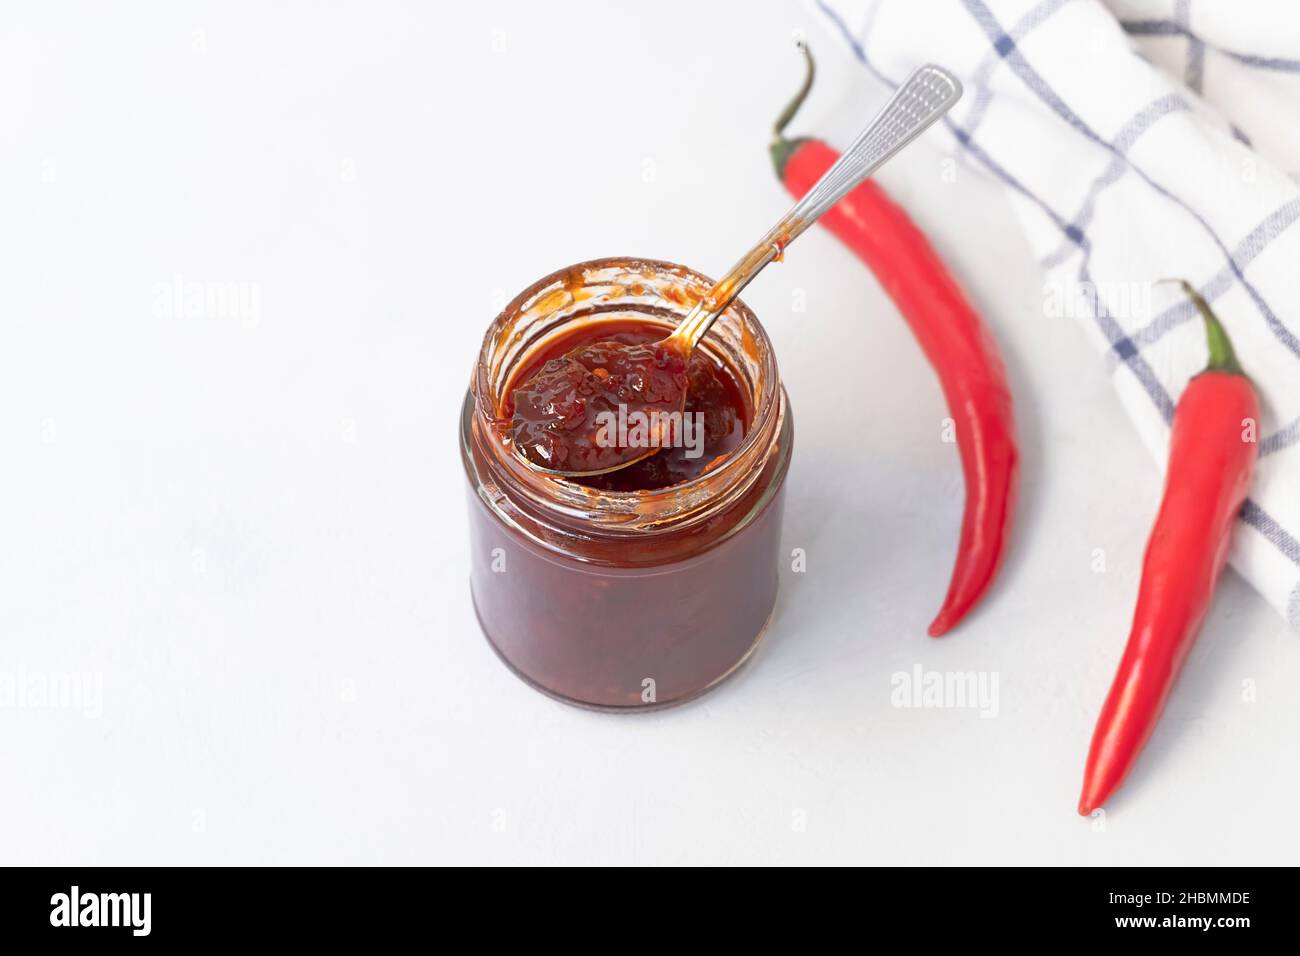 Above view of jar with sweet spicy jam made from chili pepper on neutral grey background with copy space, selective focus Stock Photo